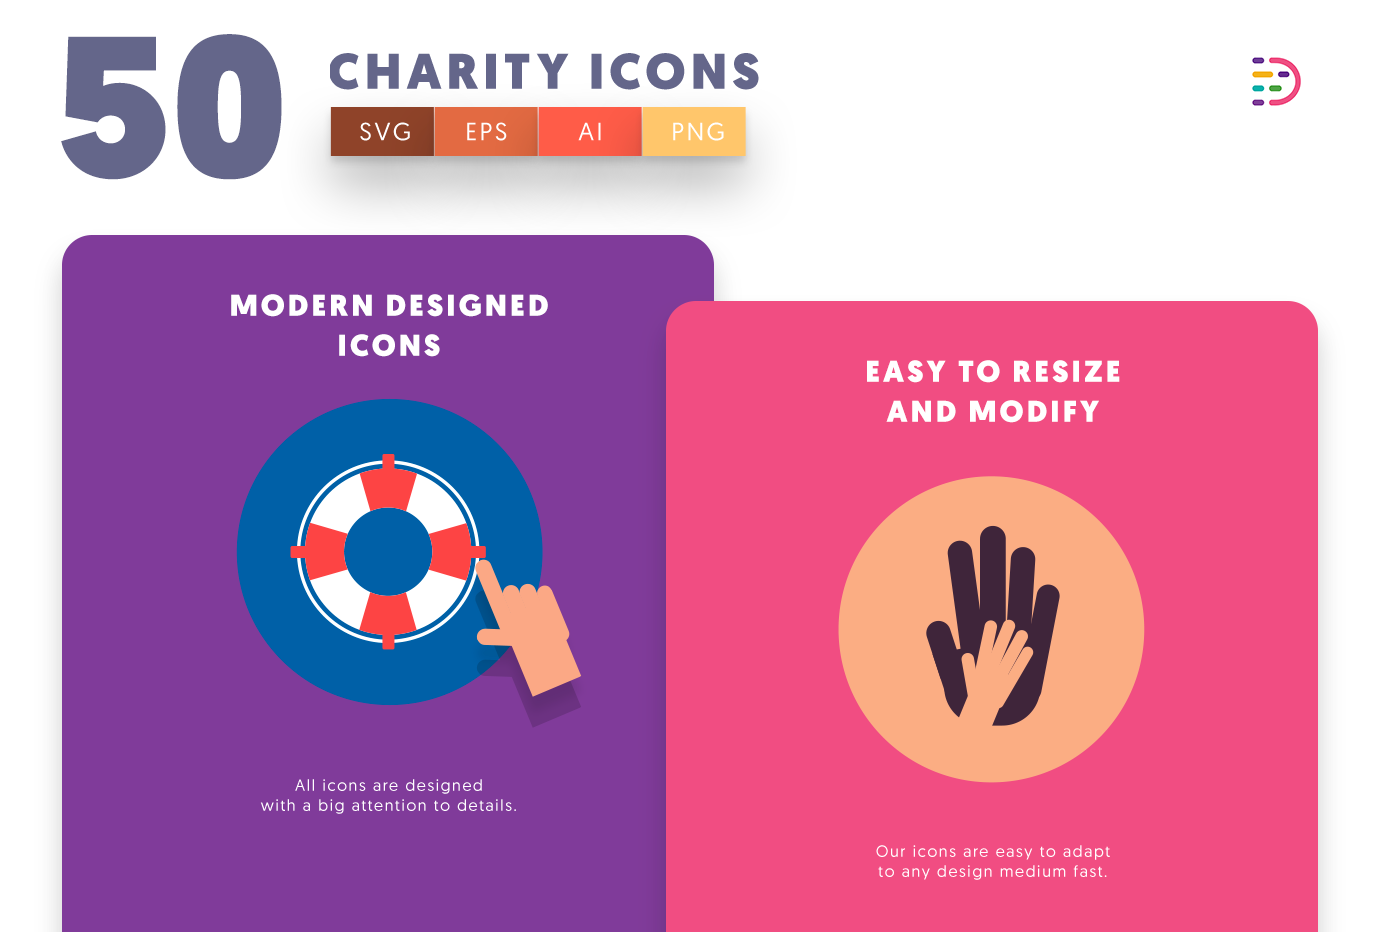 50 Charity Icons with colored backgrounds